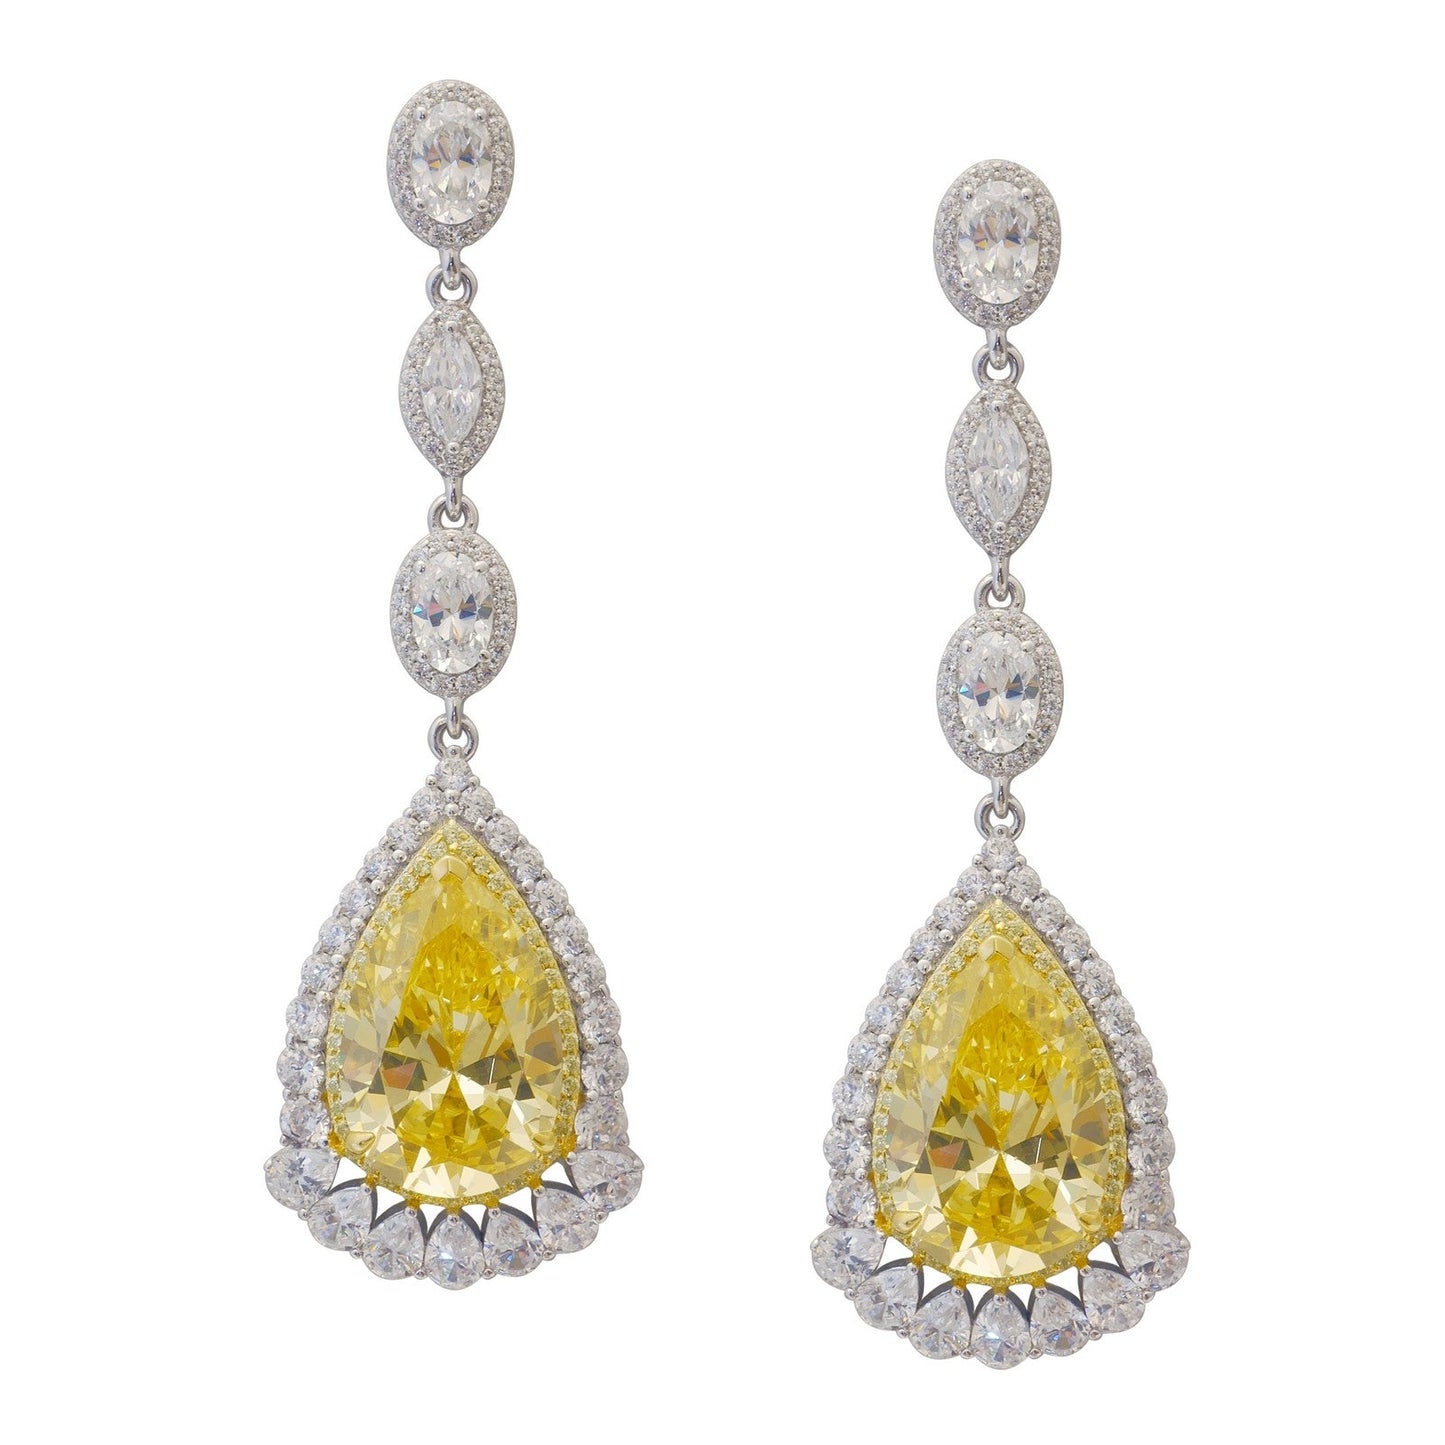 Load image into Gallery viewer, Lafonn Regal Statement Drop Earrings Canary EARRINGS Platinum 18 CTS Approx. 15mm (W) x 55mm (H)
